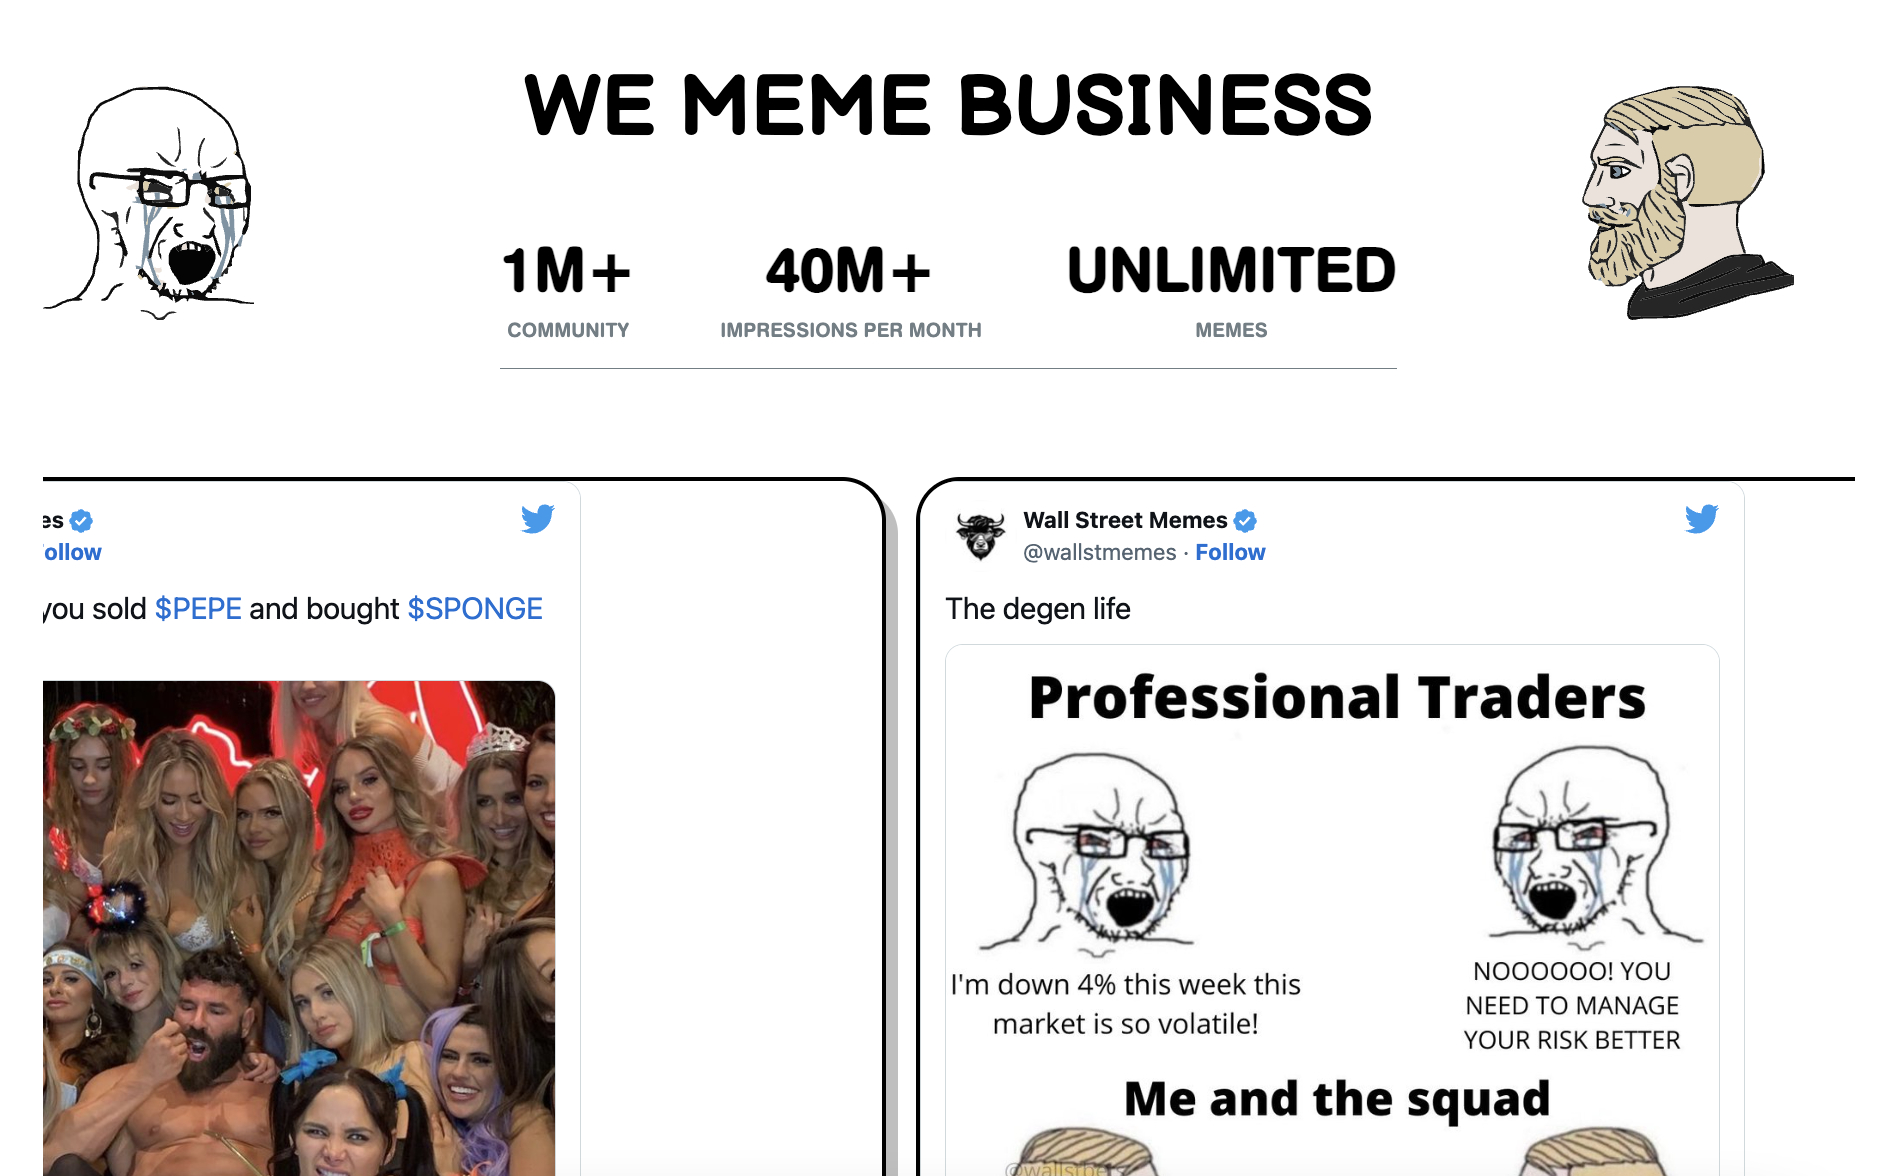 Wall Street Memes Campaign Highlights